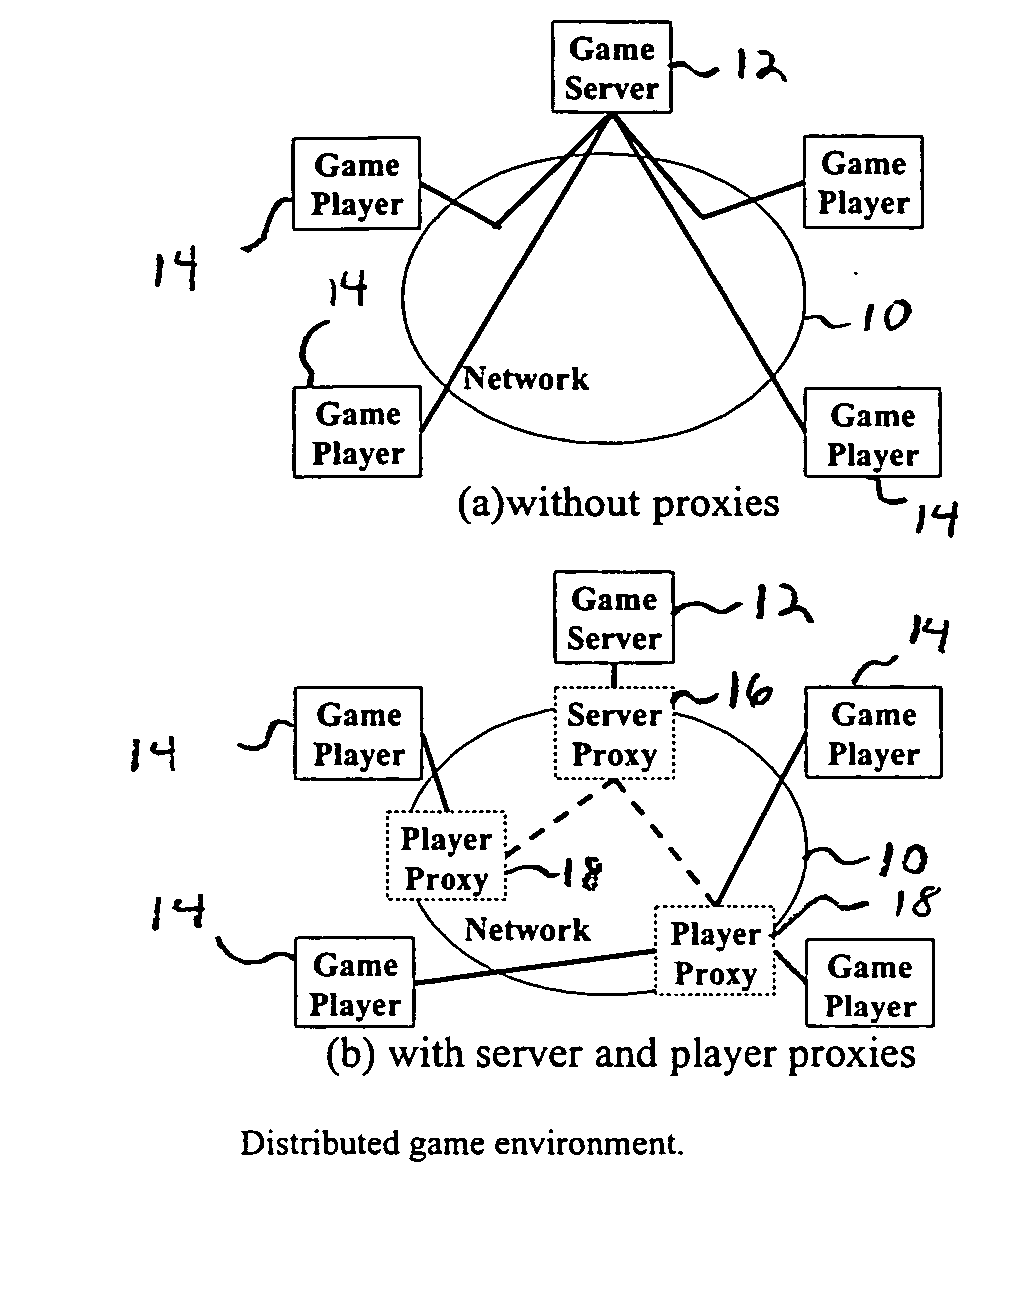 Apparatus and method for fair message exchanges in distributed multi-player games